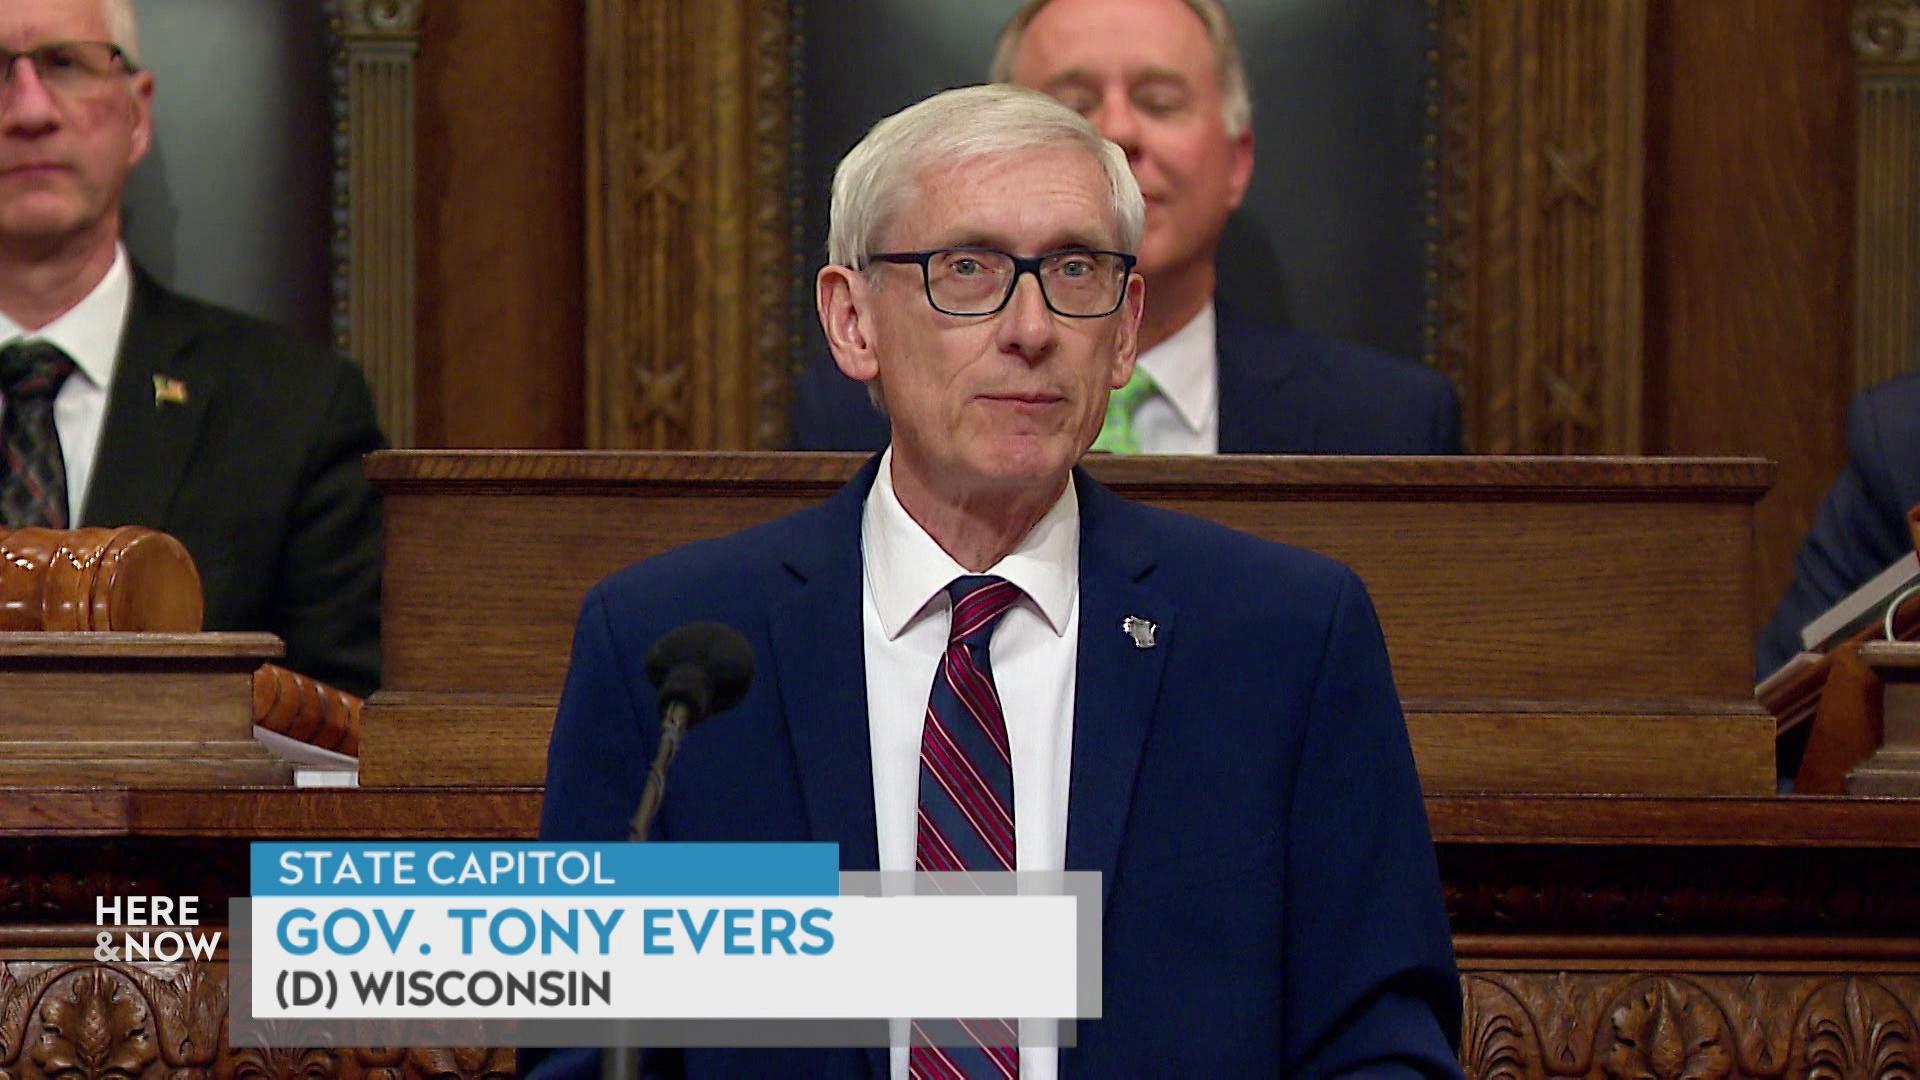 A still image from a video shows Tony Evers speaking into a microphone in front of three individuals seated on a dais, with a graphic at bottom reading 'Gov. Tony Evers' and '(D) Wisconsin.'